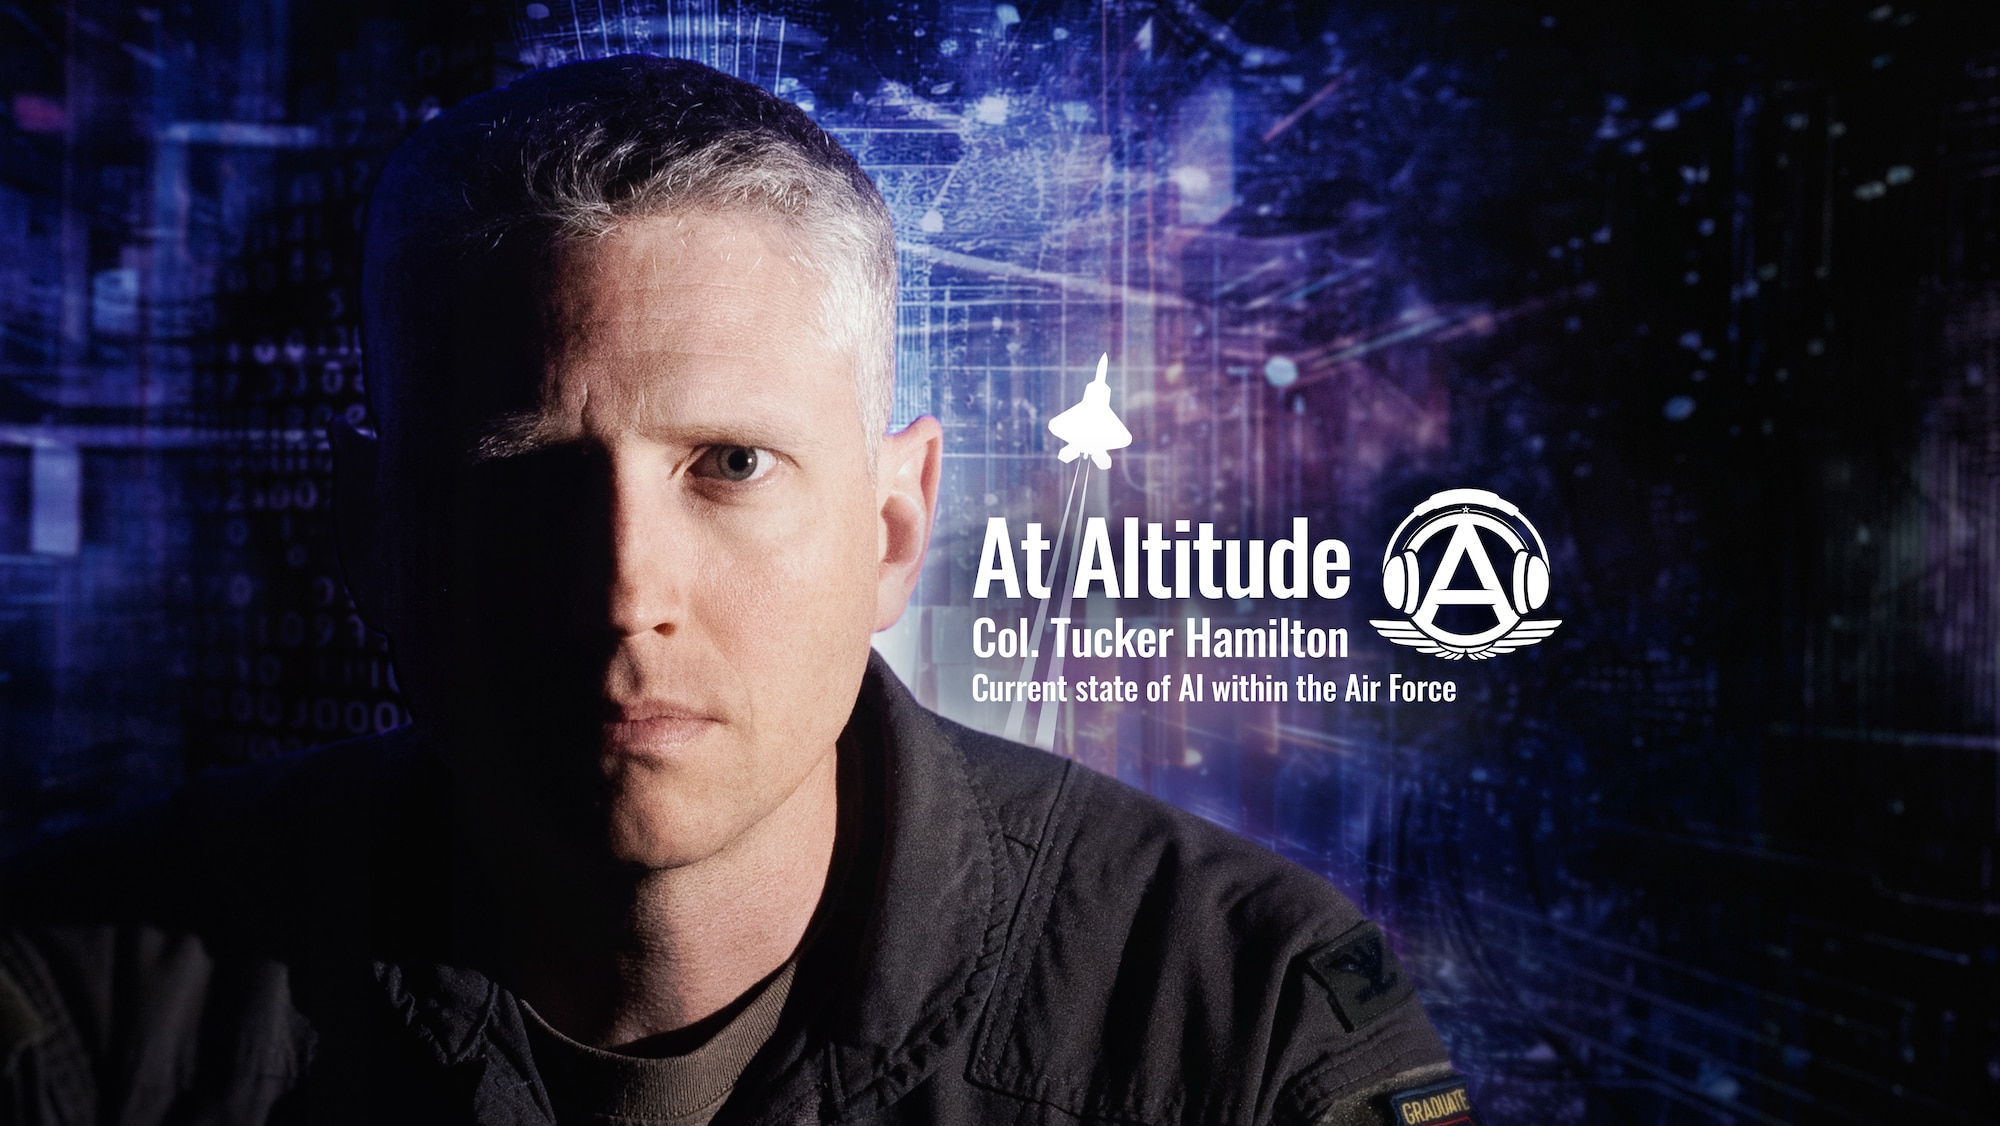 At Altitude - Col. Tucker Hamilton discusses the current state of AI within the Air Force